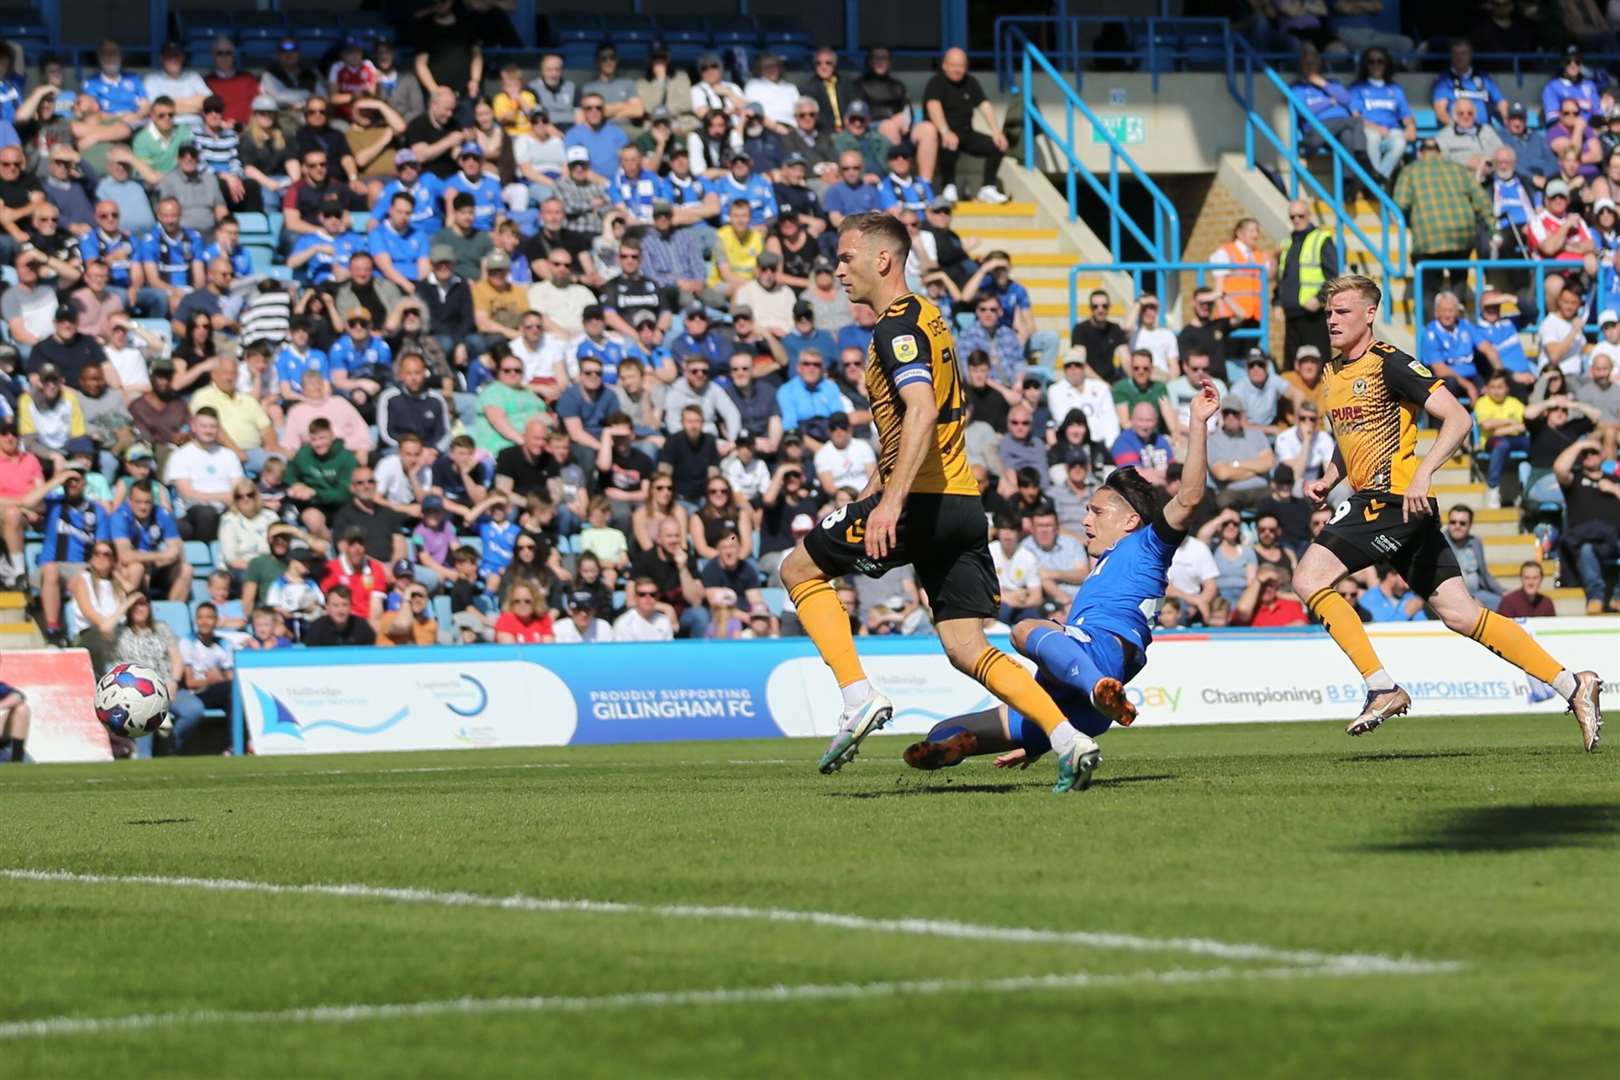 Tom Nichols with a chance for Gillingham in the first half